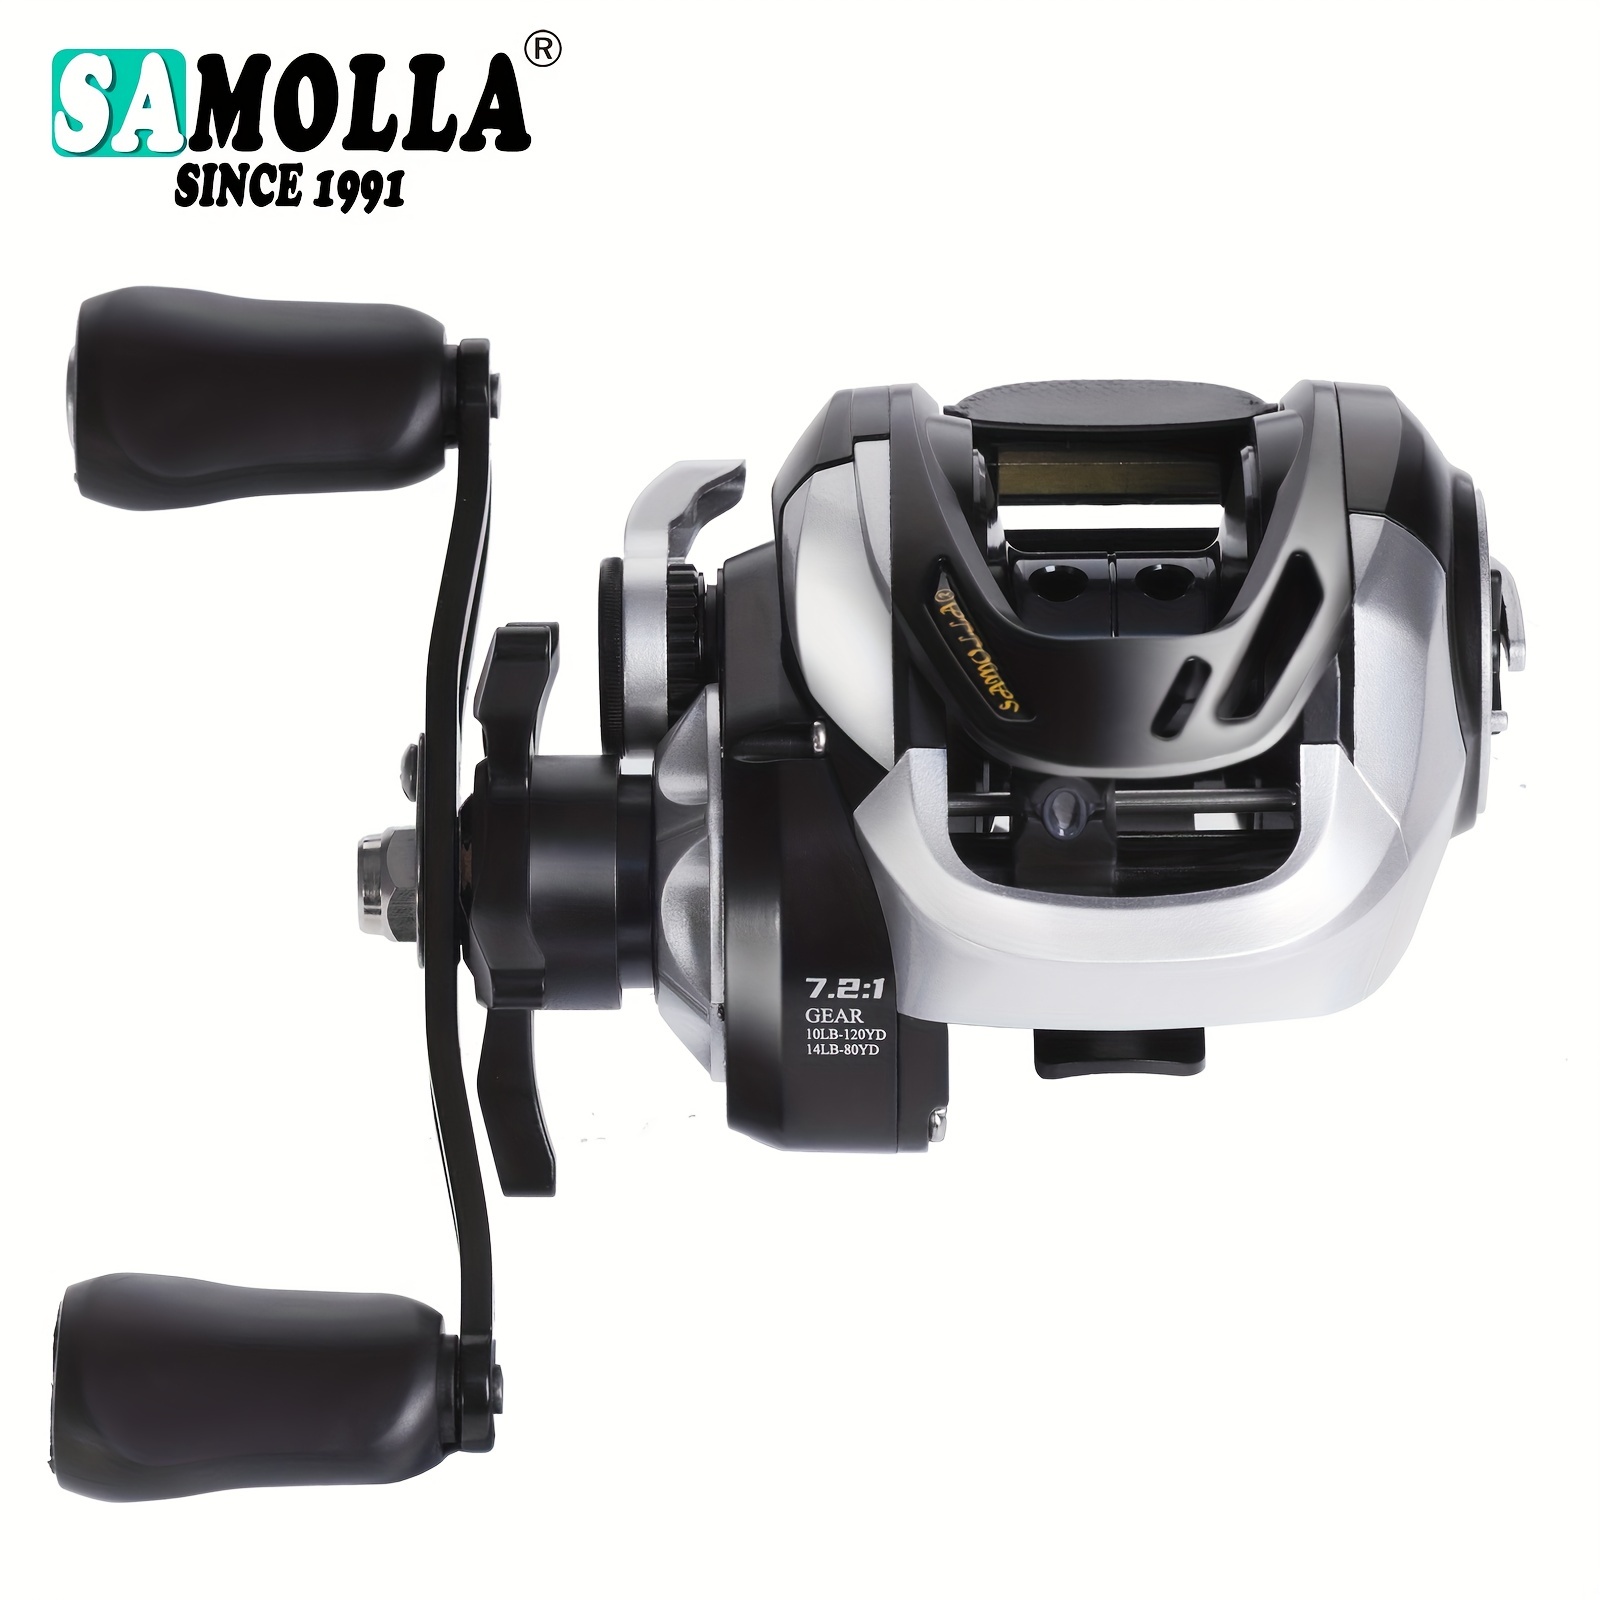  Fishing Conventional Reel Saltwater, for Catfish,  Salmon/Steelhead, 19+1 Strong Bearing, Magnetic Brake, 7.3:1 Speed Ratio  (Size : Right Hand) : Sports & Outdoors